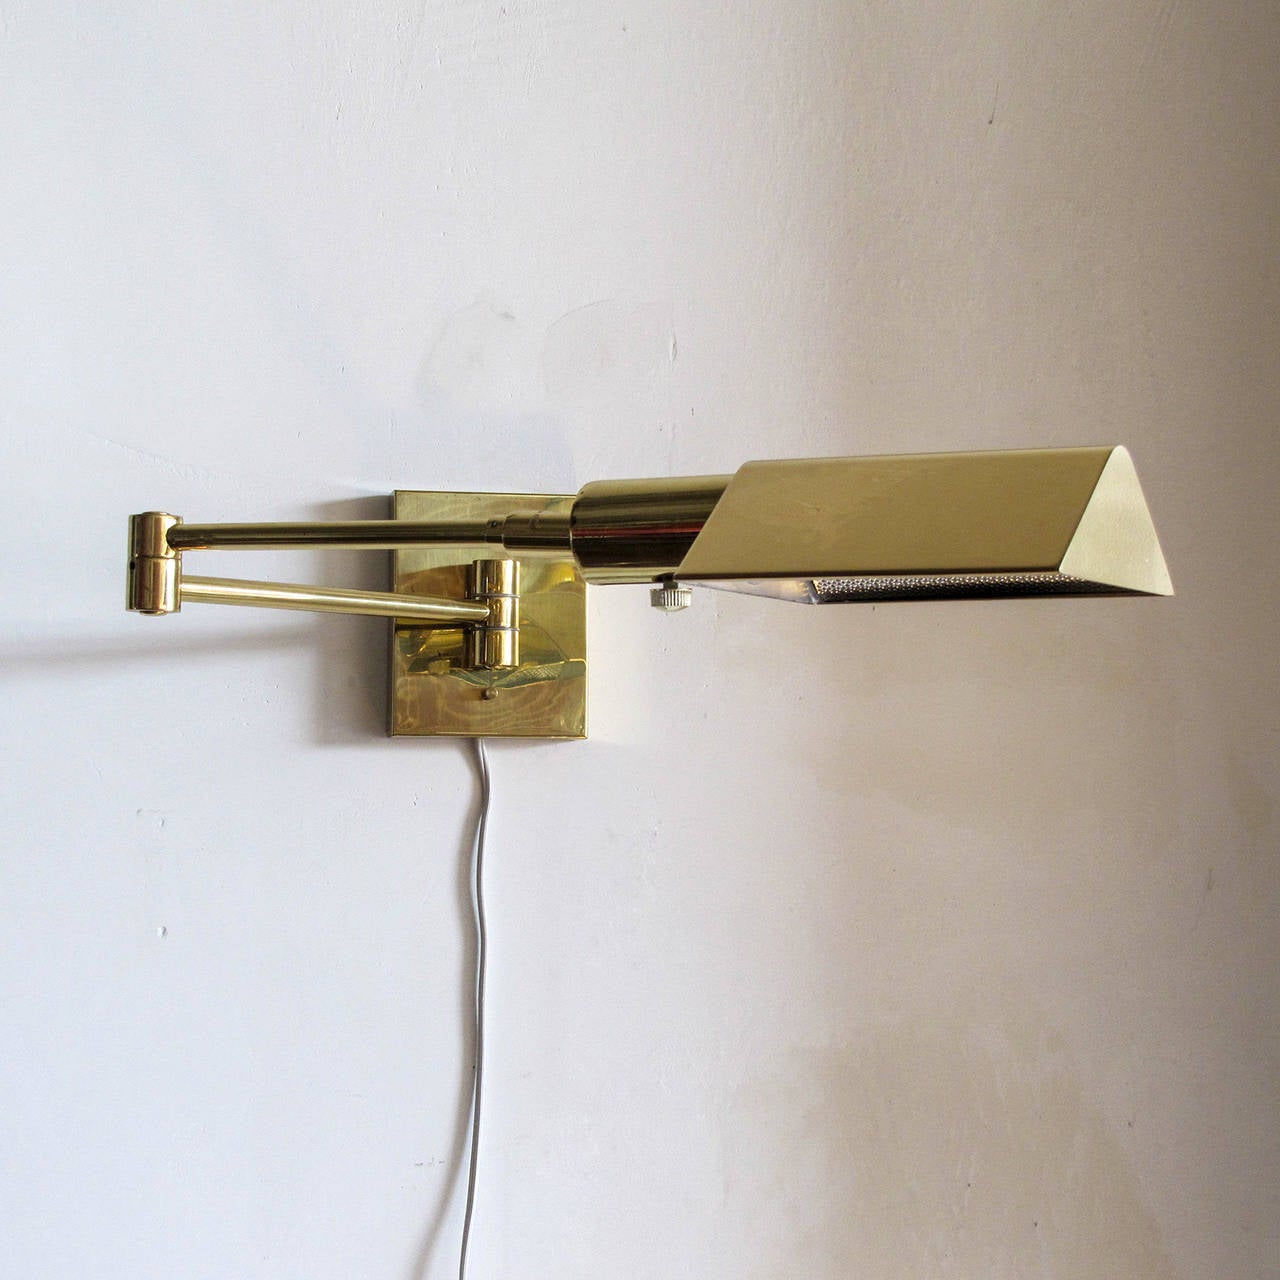 Pair of adjustable brass swing arm wall lamps by Koch & Lowy, brass bodies and hoods, adjustable vertically and swivel for optimal light direction, dimmable, stamped 